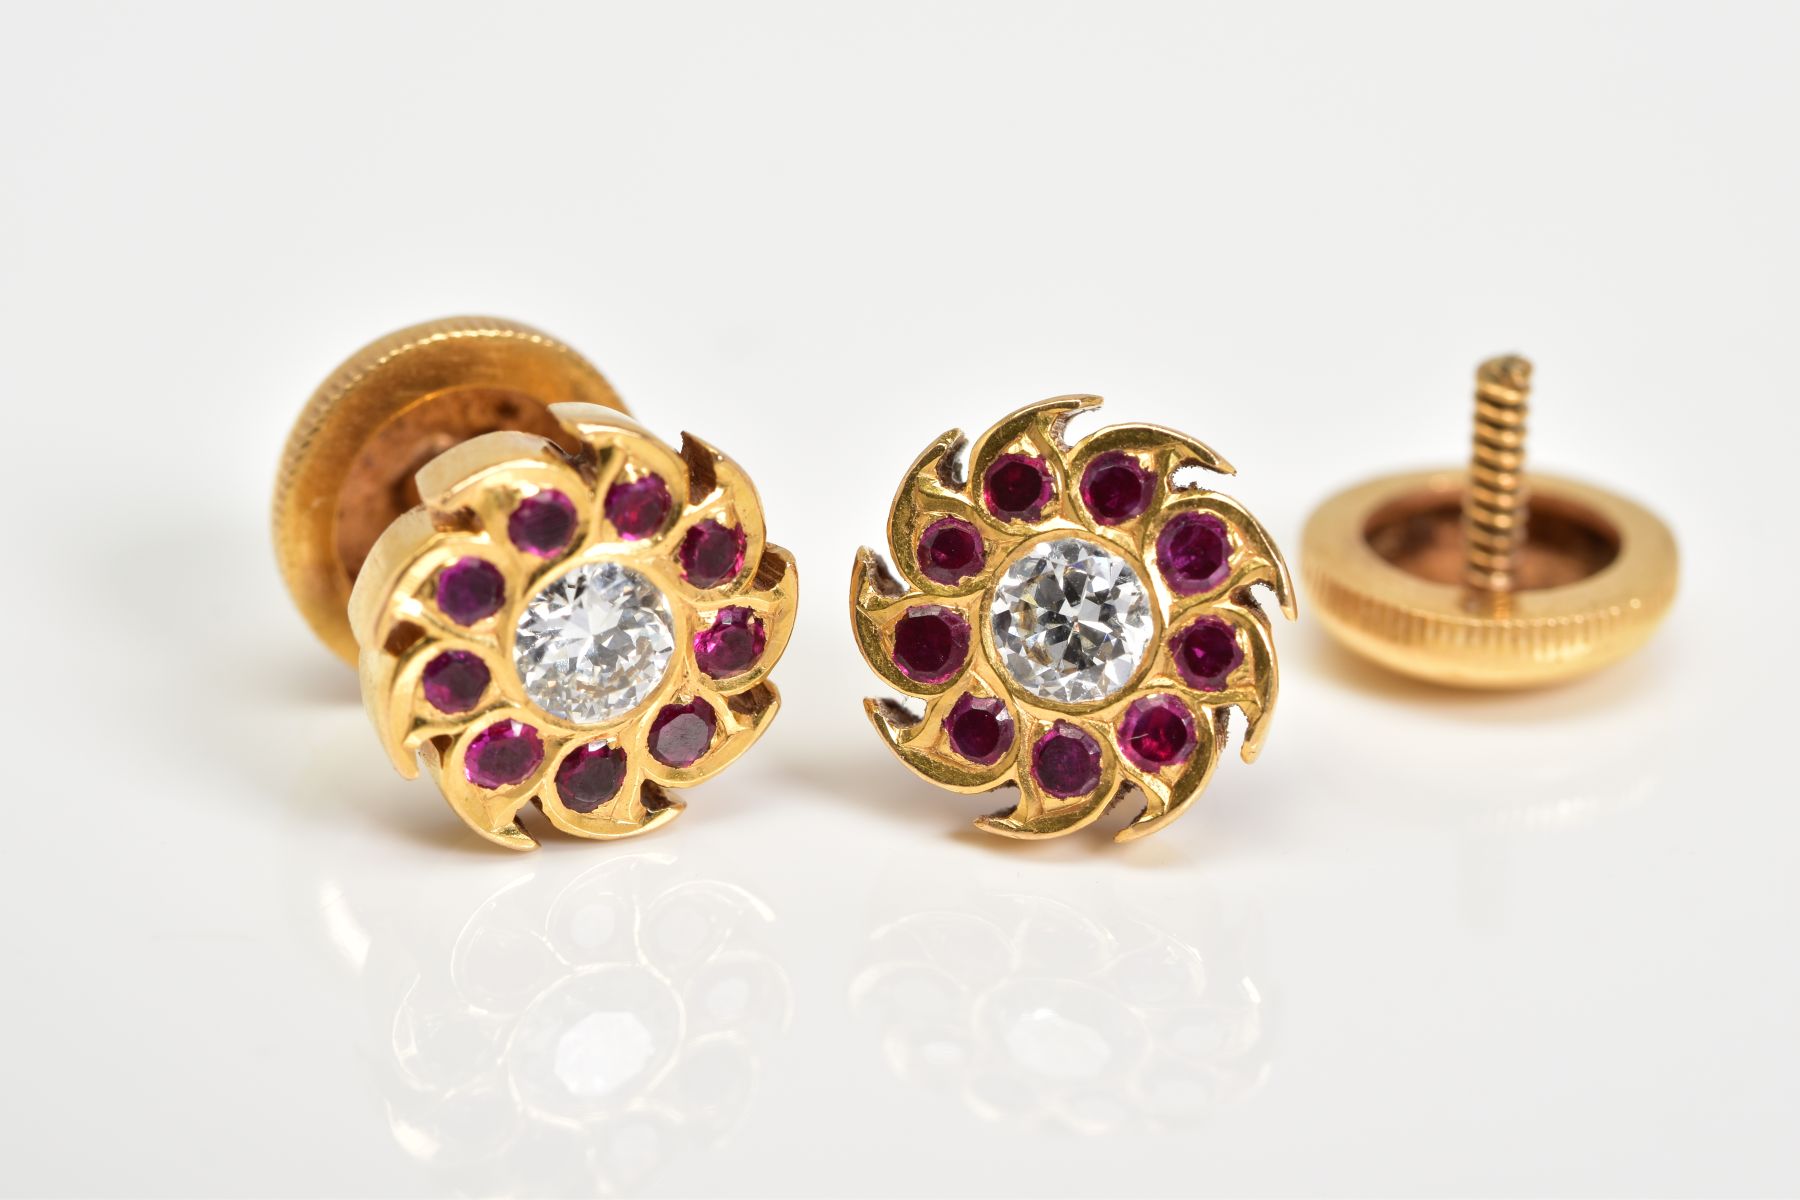 A PAIR OF RUBY AND DIAMOND ROUND STUD EARRINGS, centering on a round brilliant cut diamond